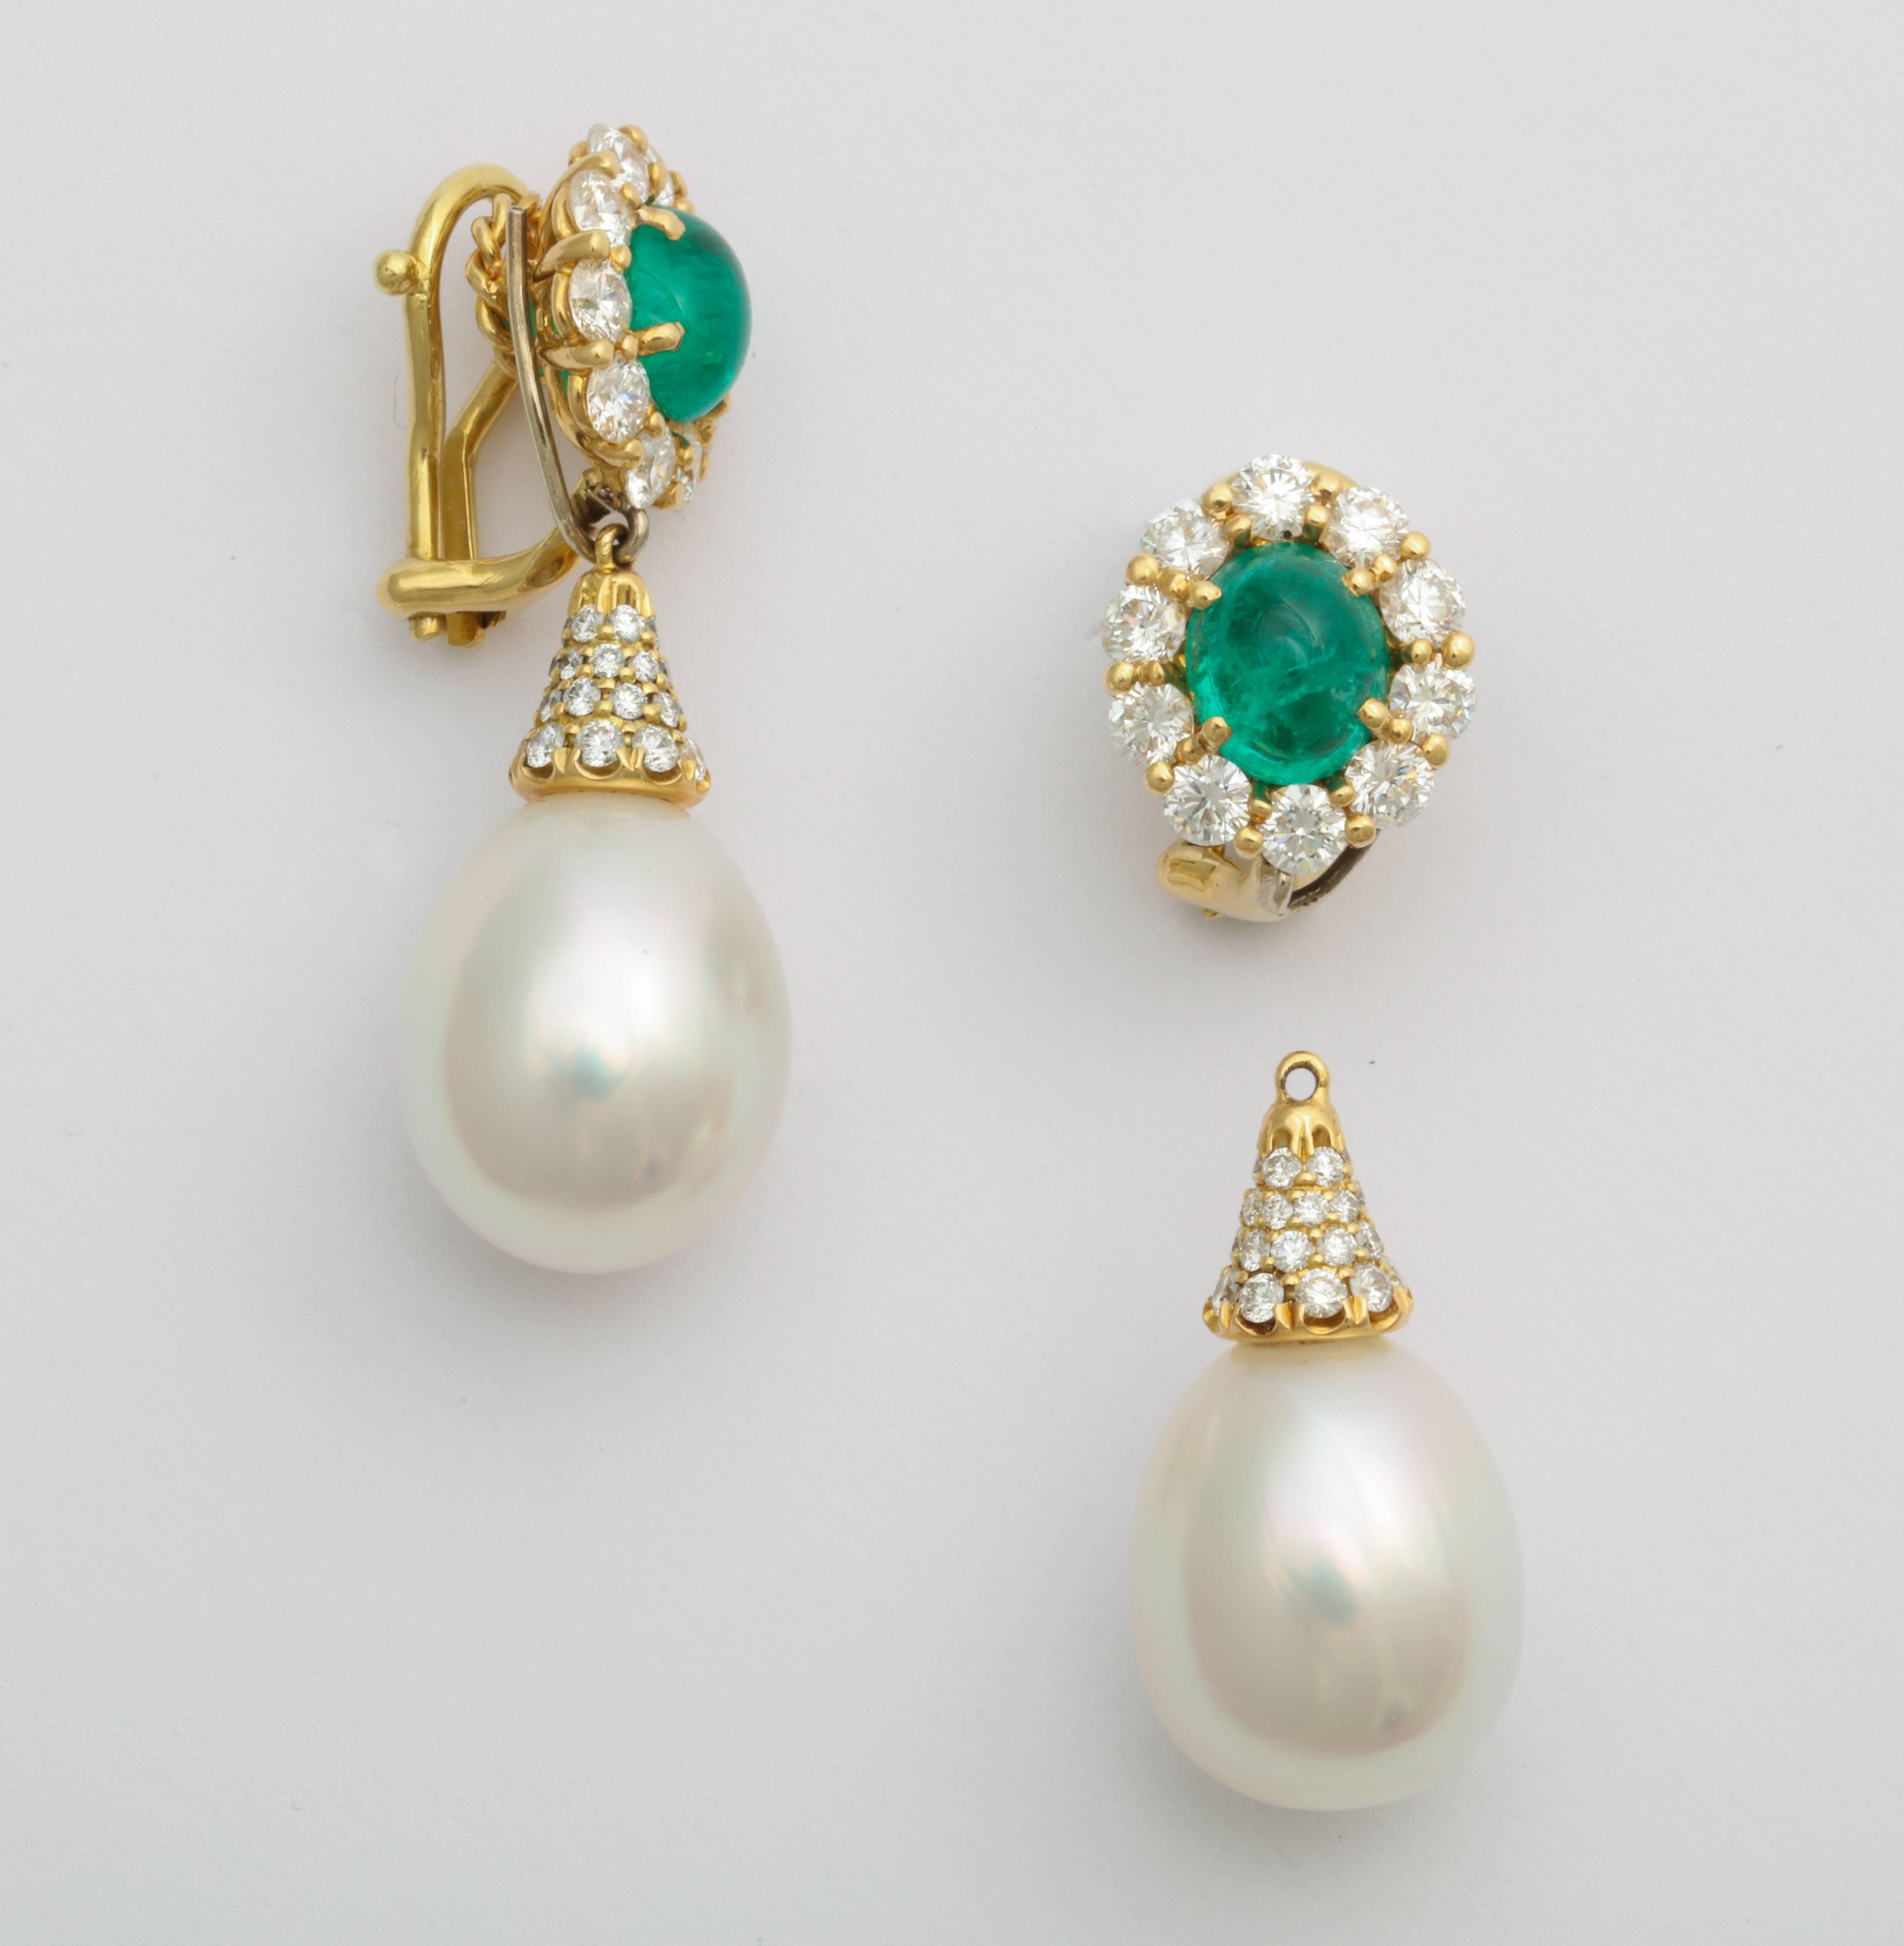 Emerald cabochon cut center stones are surrounded by a row of round brilliant diamonds in a shared-prong setting, with removable pave diamond and South Sea pearl drop pendants. Timeless design in a perfect day/night earring for emerald and pearl